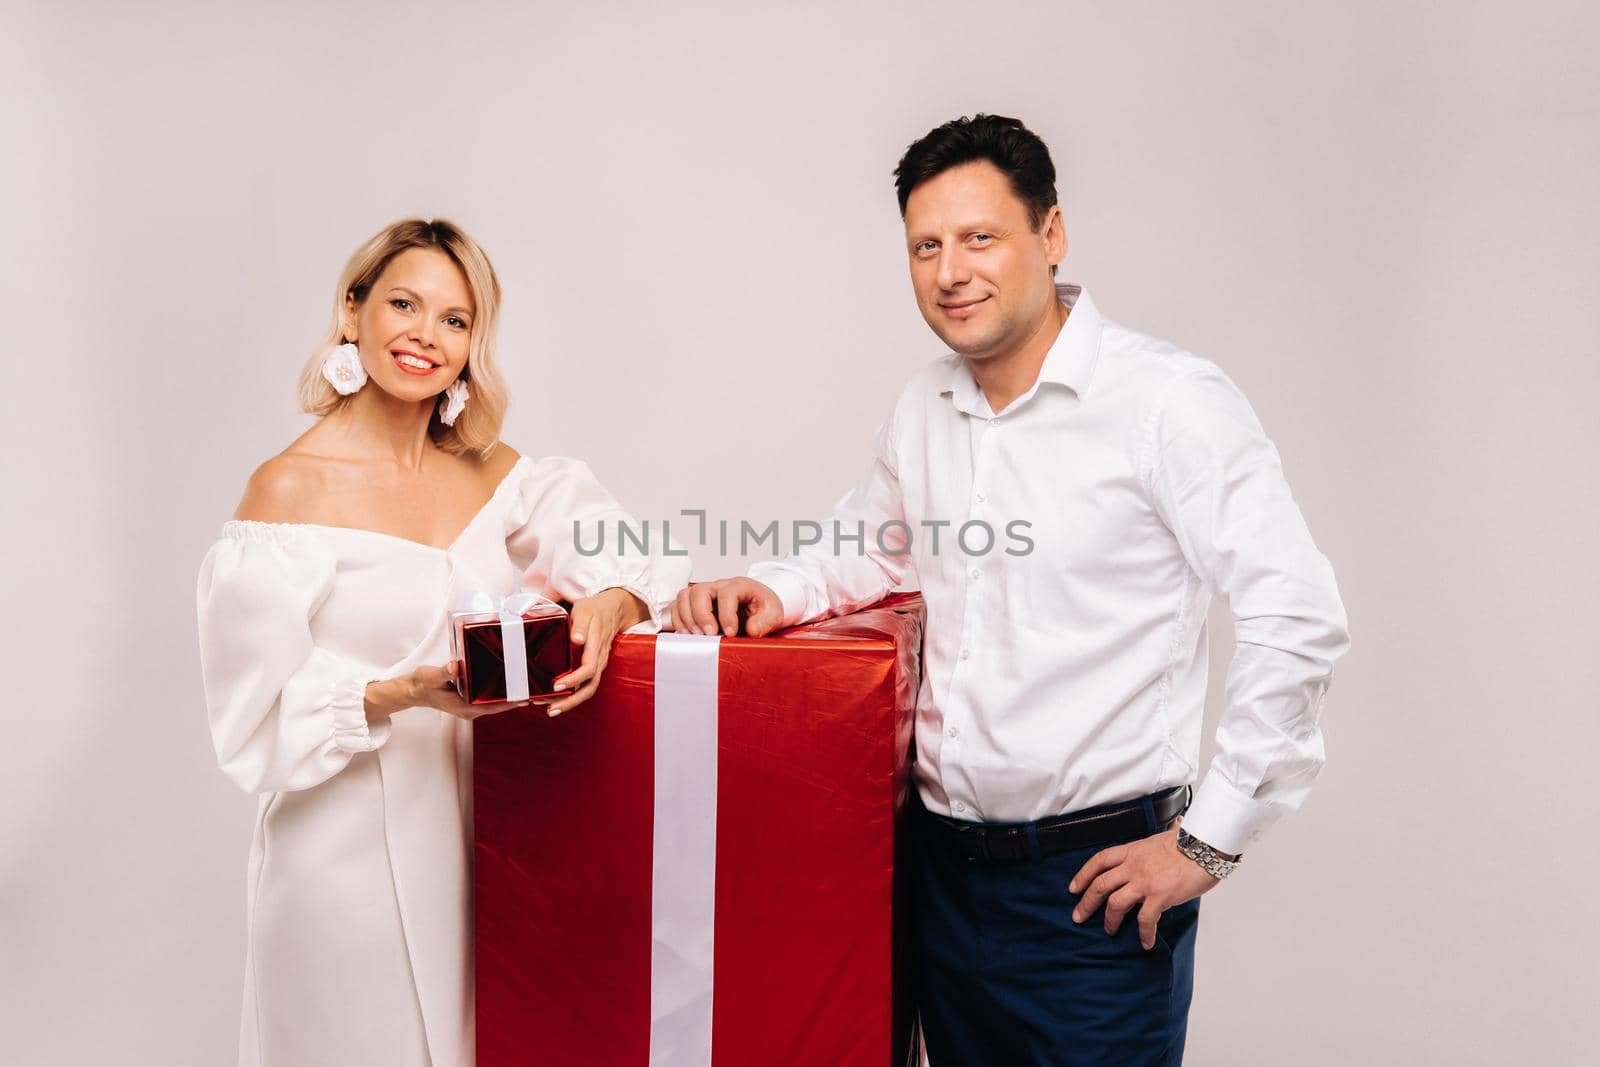 Portrait of a man and a woman with a large gift on a beige background.